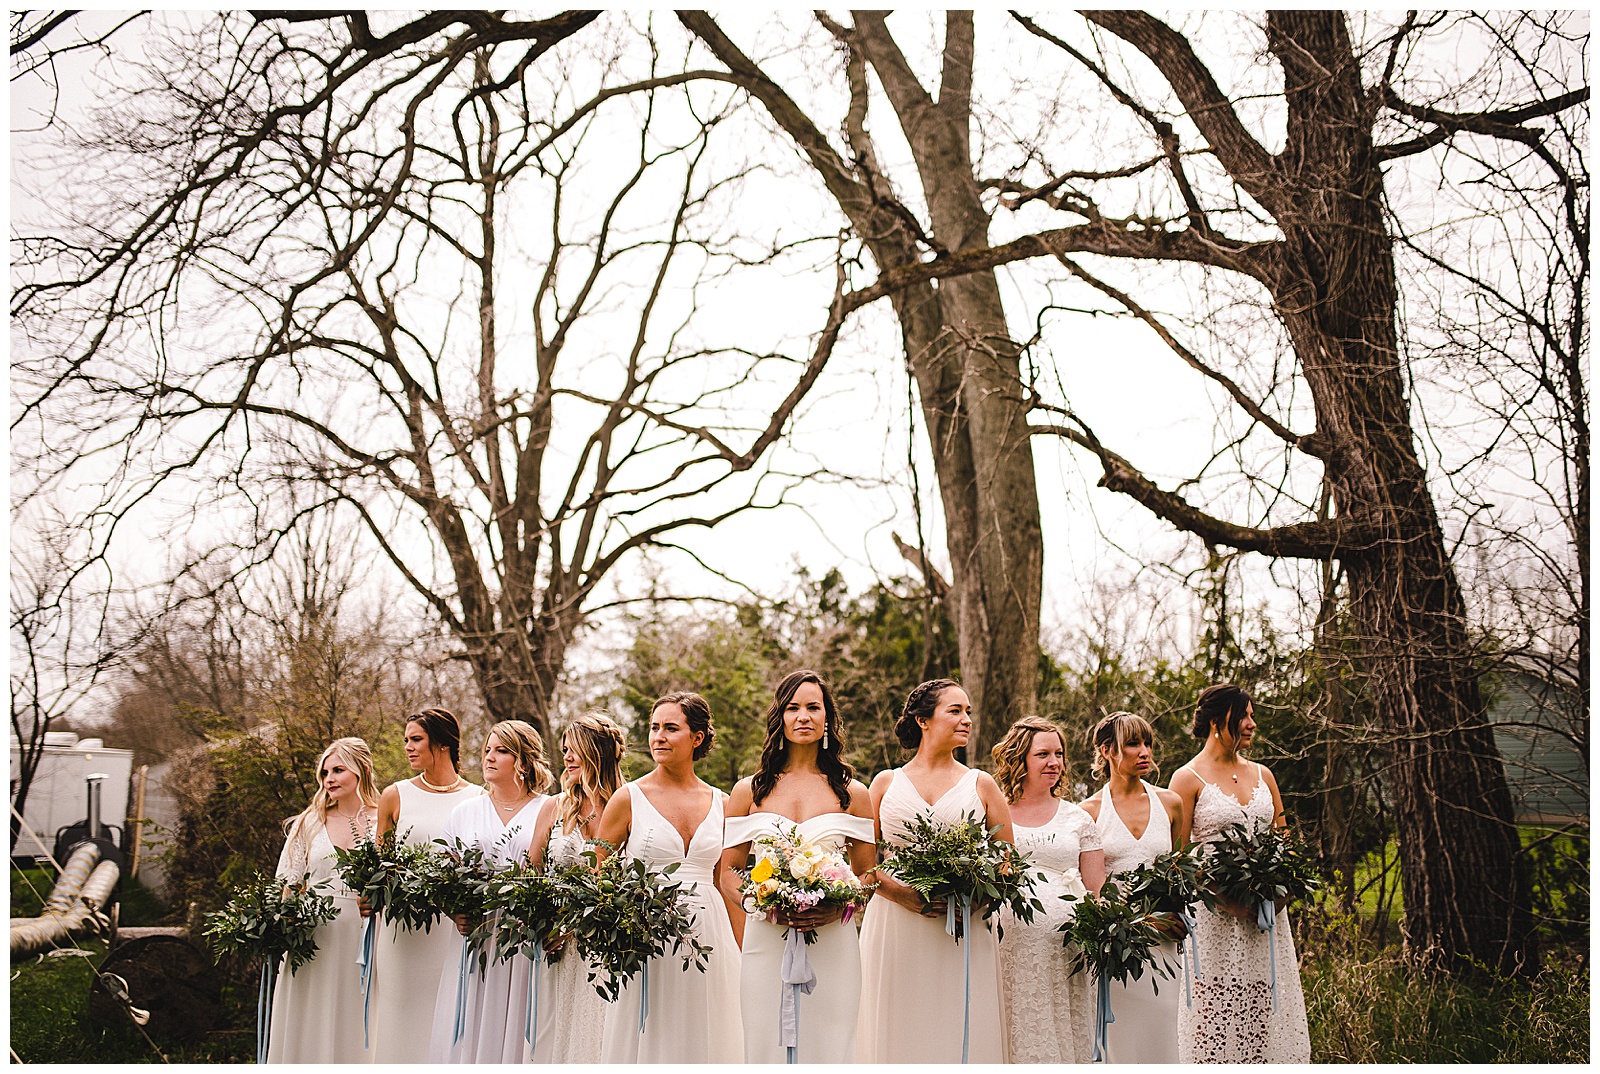 Bridesmaids in all white, gorgeous greenery bouquets by Homegrown Florist